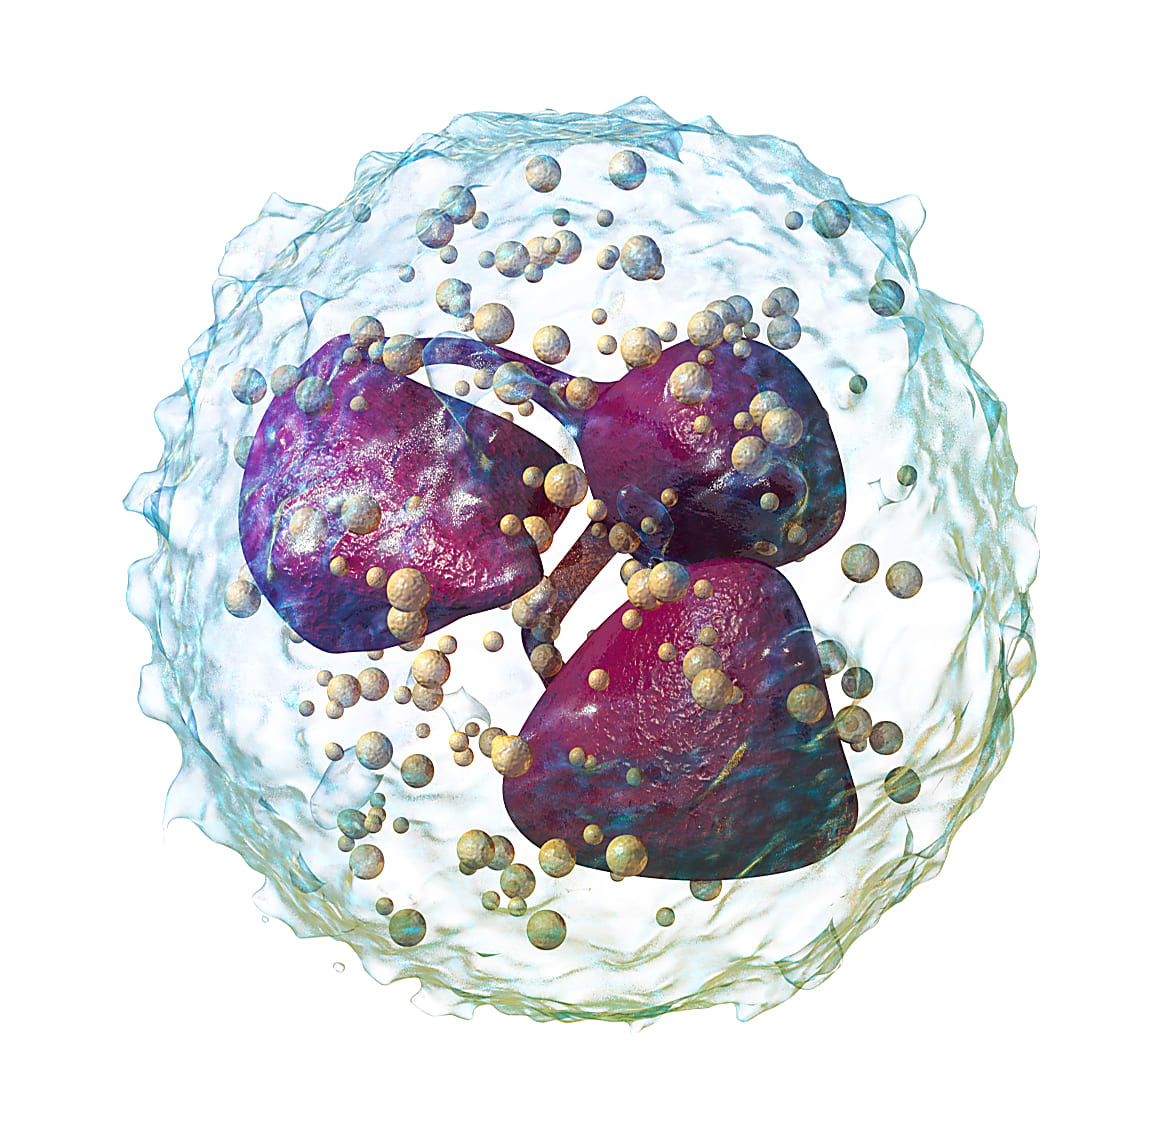 Drawing of a neutrophil cell. CREDIT: Blausen.com staff (2014). "Medical gallery of Blausen Medical 2014." WikiJournal of Medicine 1 (2). DOI:10.15347/wjm/2014.010. ISSN 2002-4436.